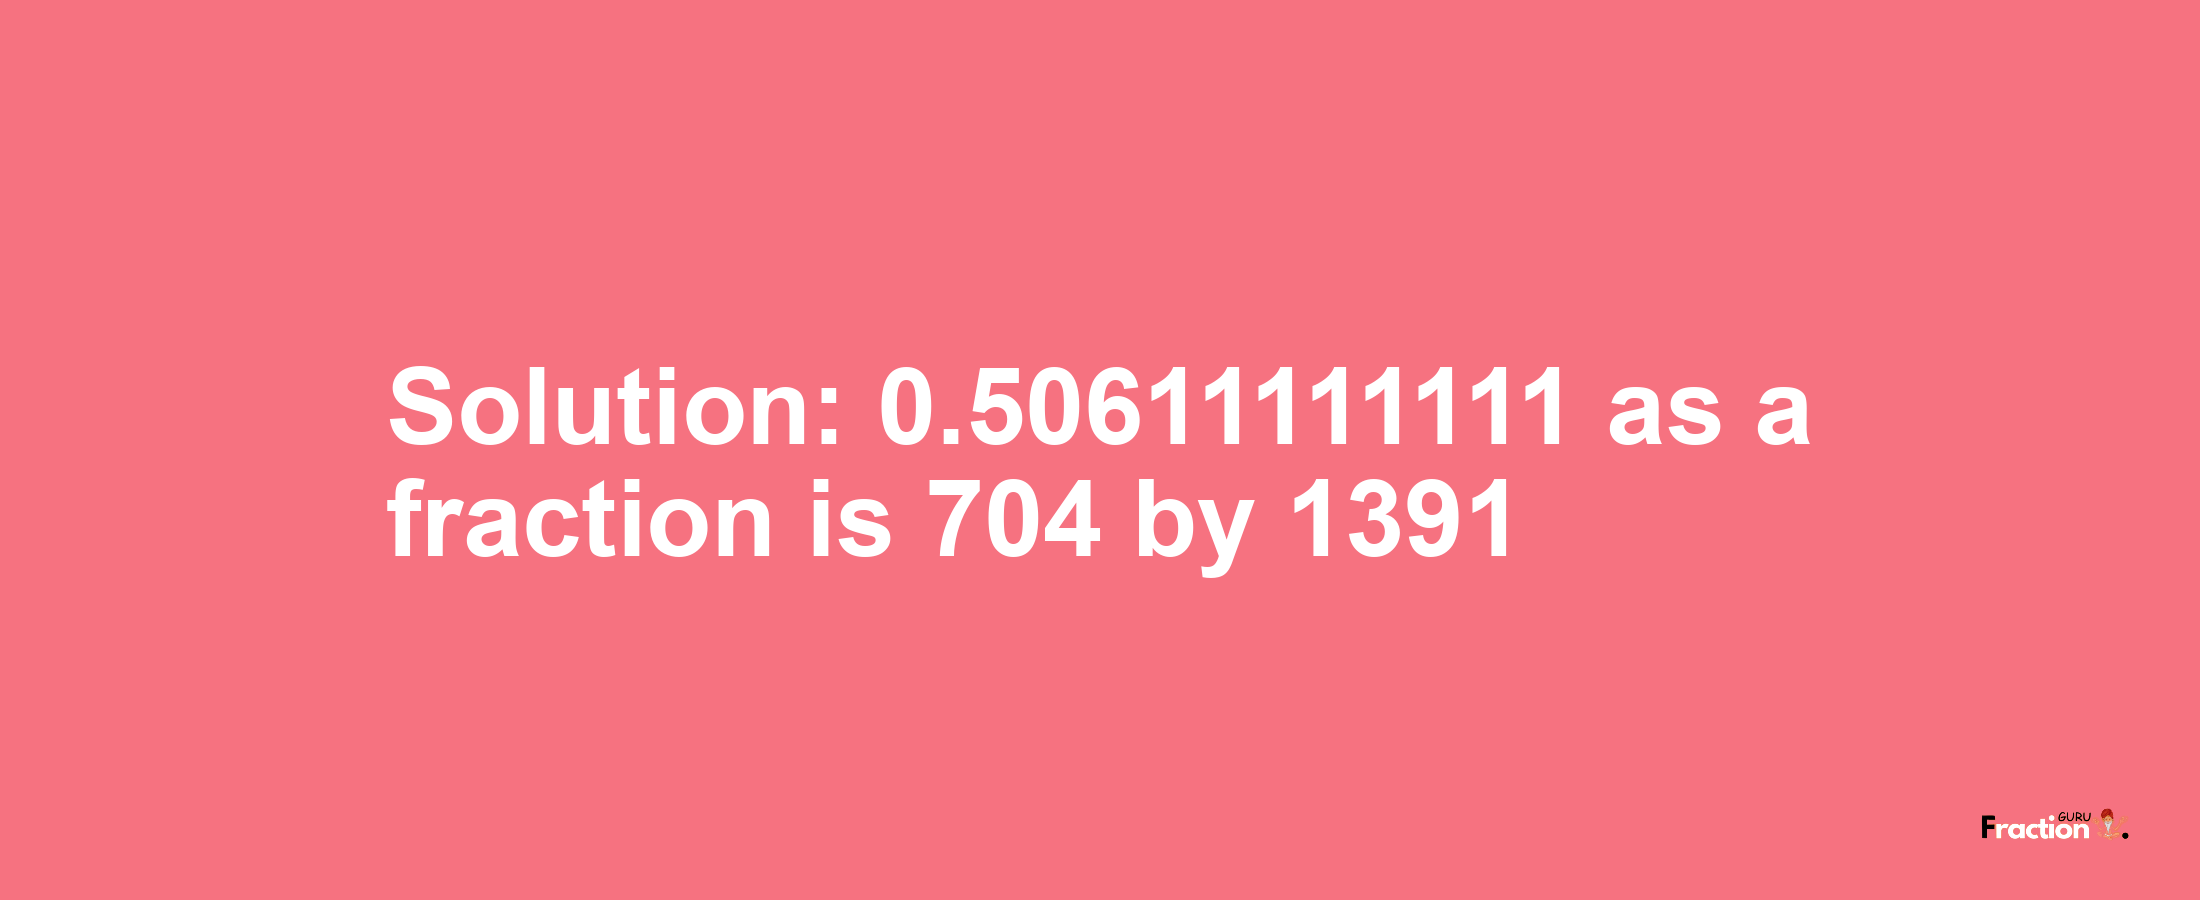 Solution:0.50611111111 as a fraction is 704/1391